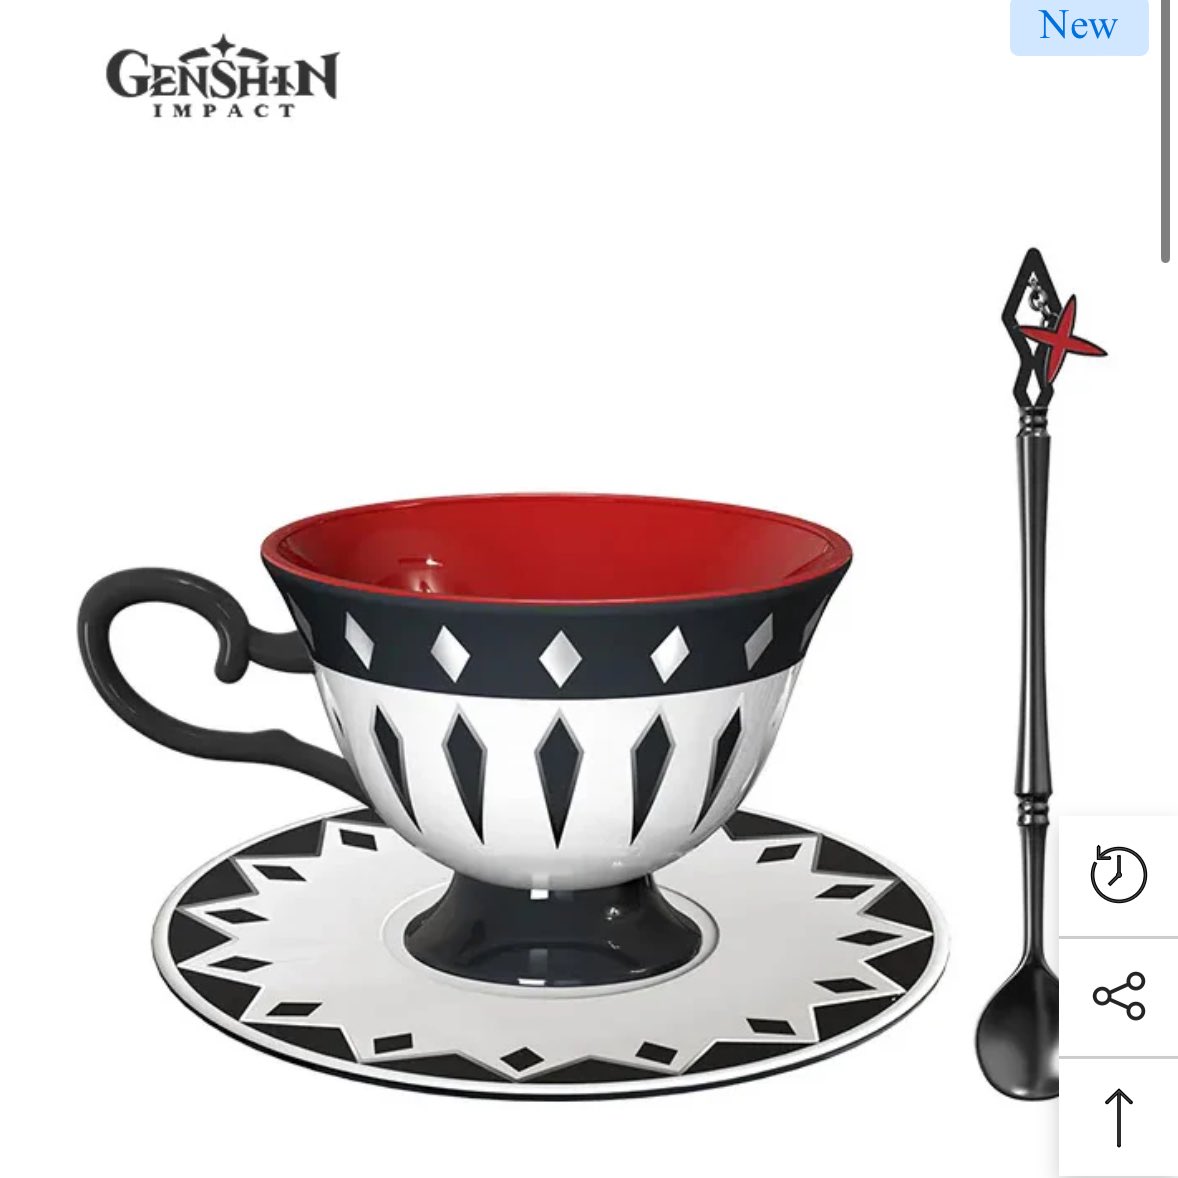 Does the official Arlecchino teacup come with her used tampons? I heard they have a distinct bitter flavour that is perfectly suited for 5 o'clock tea party